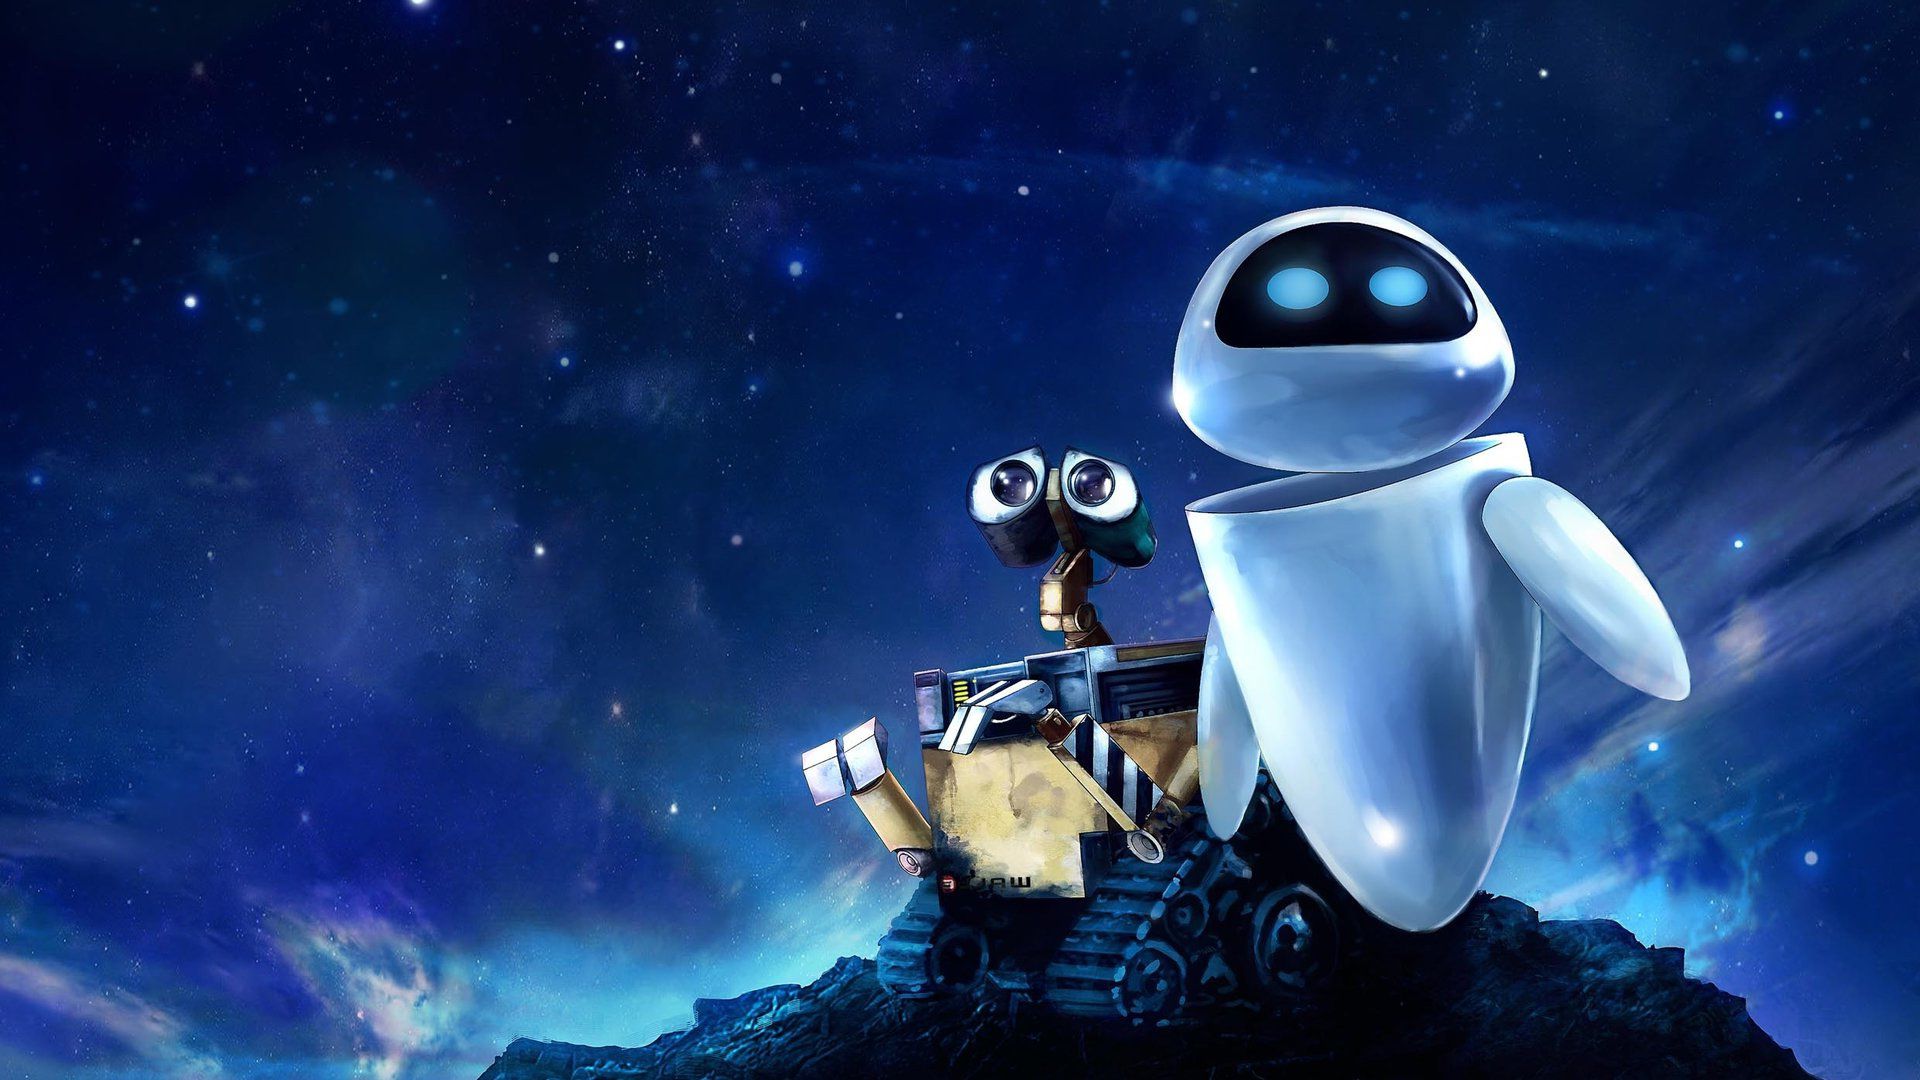 Walle Background. Walle Background